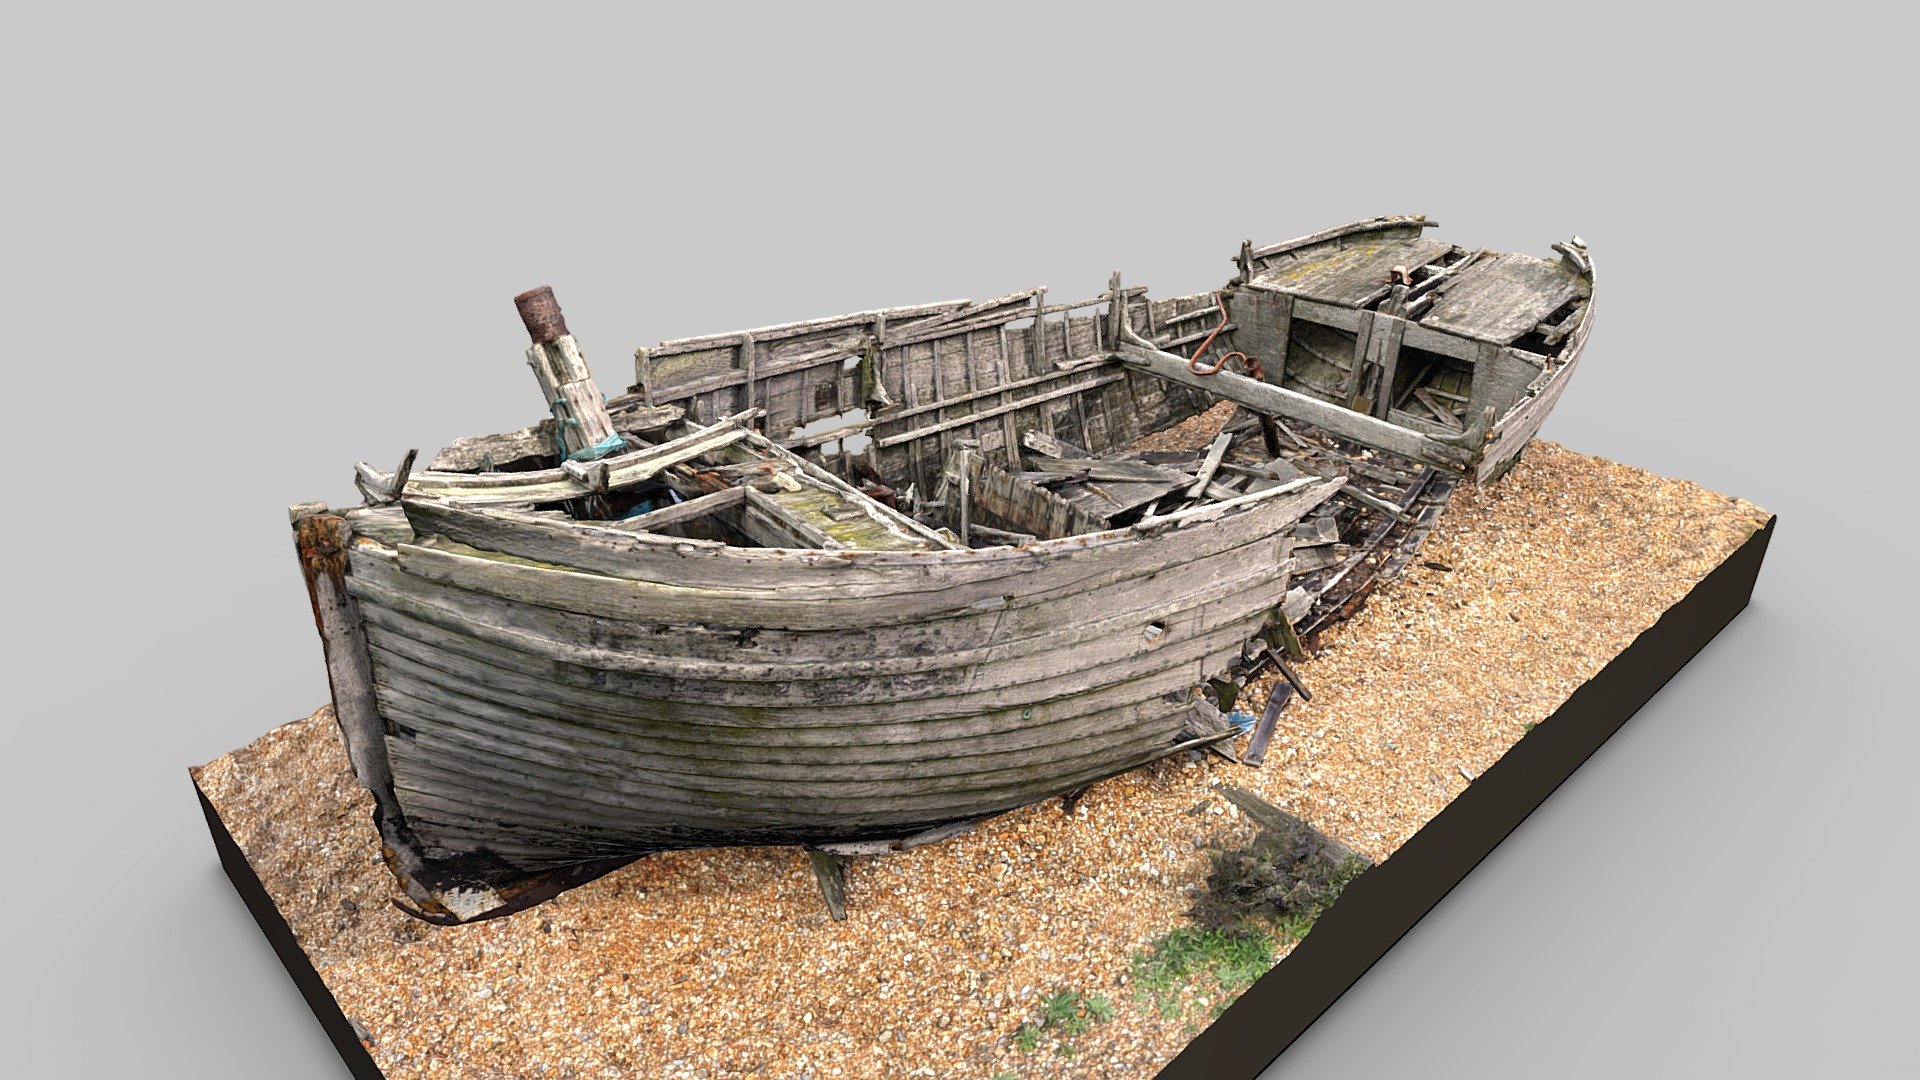 An abandoned wooden boat on Dungeness Nature Reserve, Kent, England.

382 photos taken in August 2023 with a Sony a7R III and processed in Reality Capture.

Textures: 8192 x 8192 pixels diffuse map. 8192 x 8192 pixels normal map (generated from very high resolution raw scan) 3d model